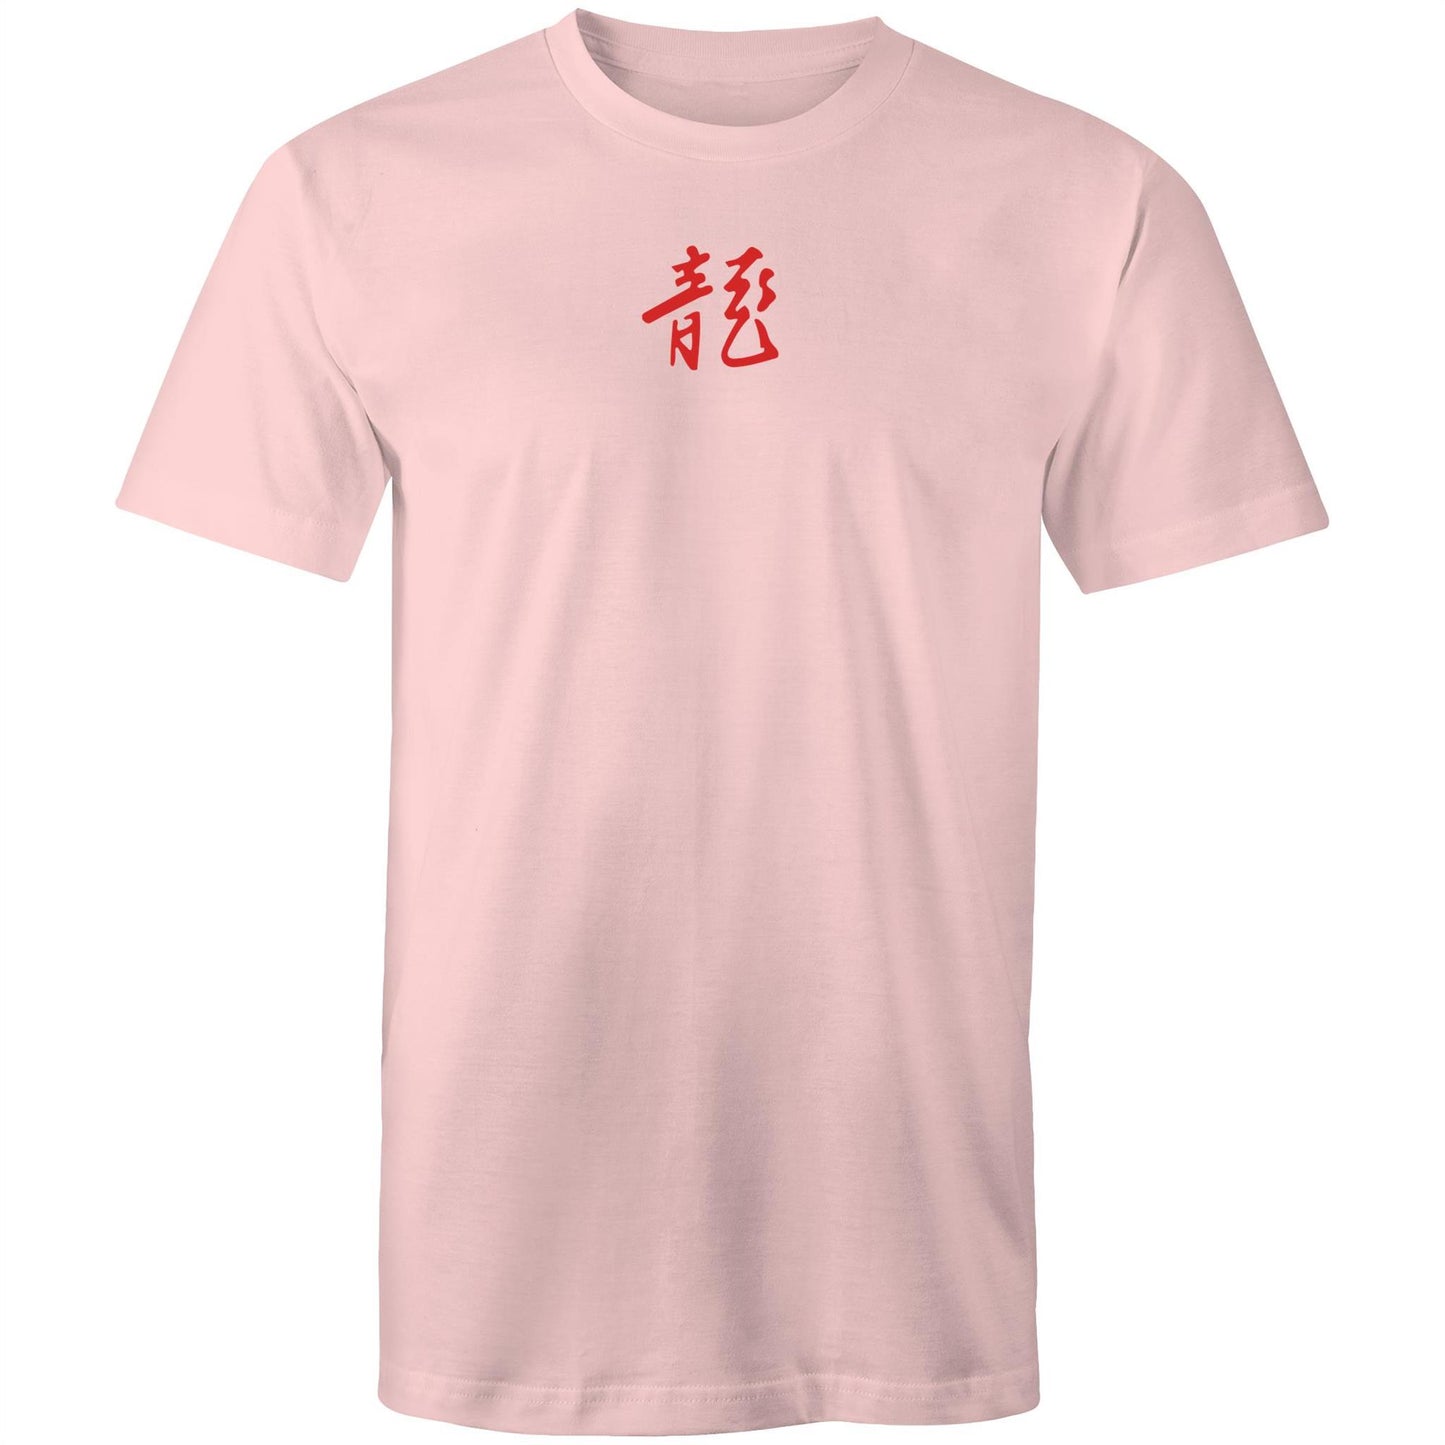 Year of the Dragon T Shirts for Men (Unisex)